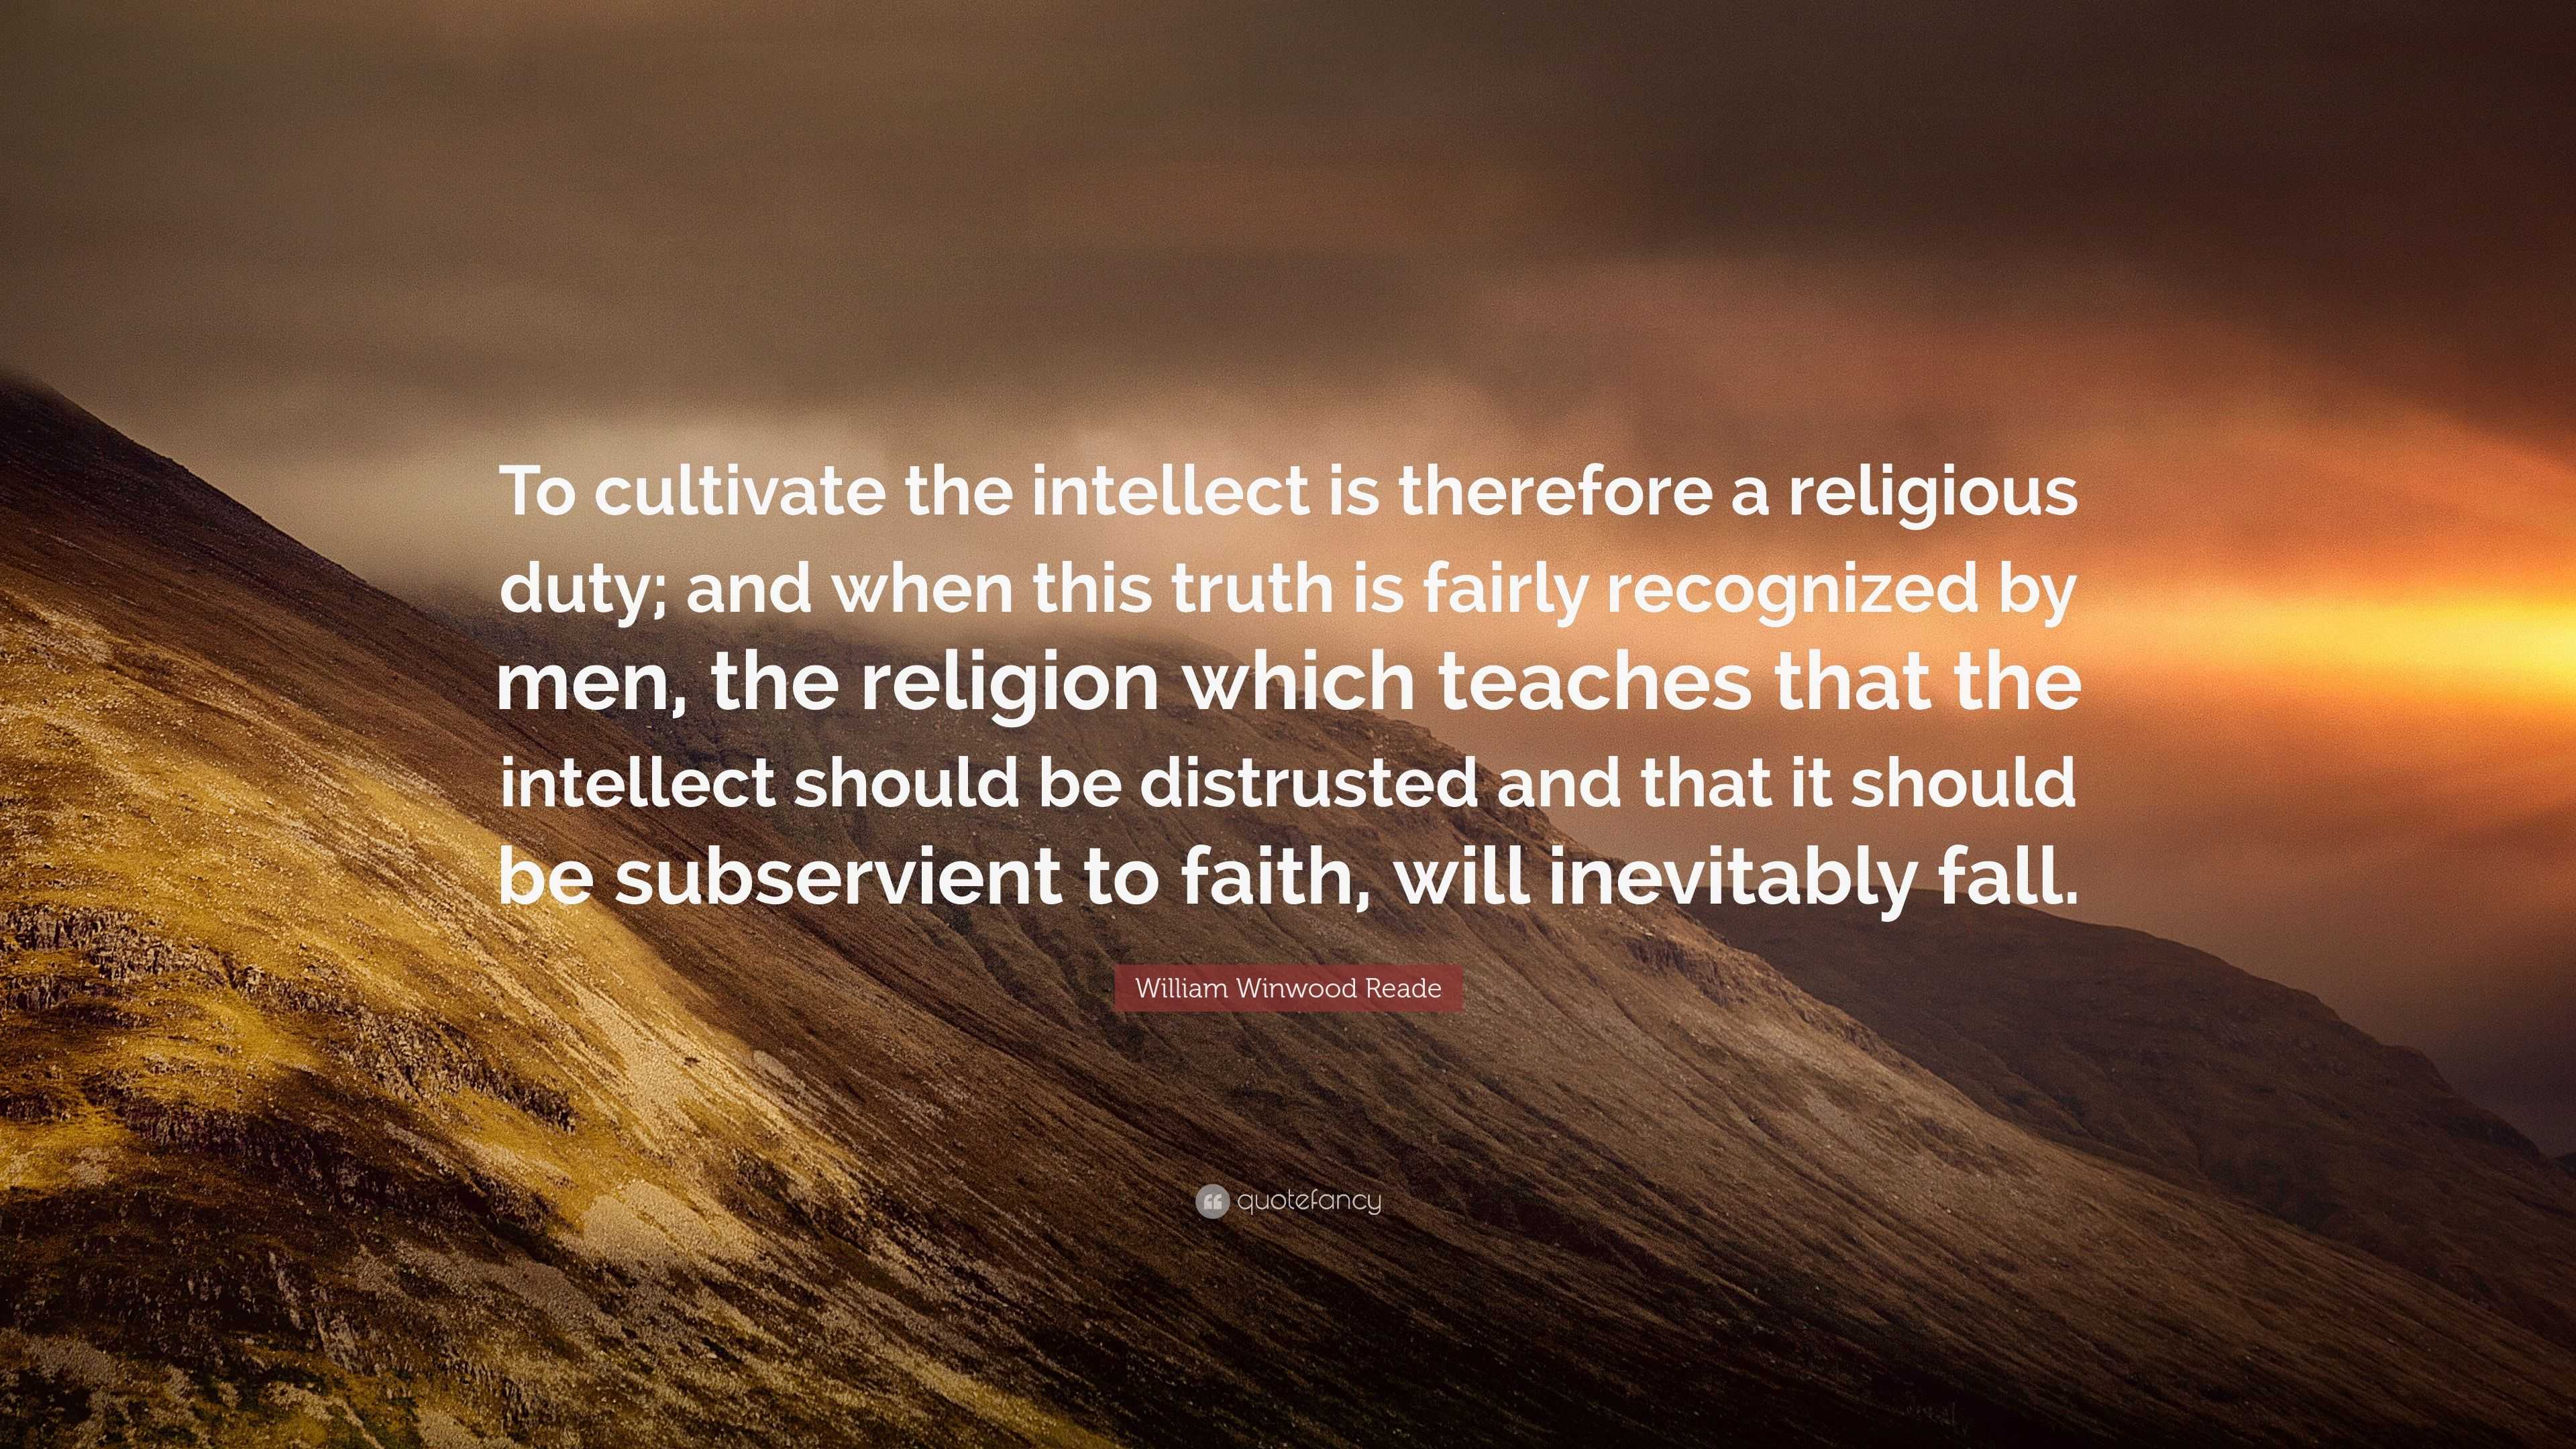 William Winwood Reade Quote: “To cultivate the intellect is therefore a ...